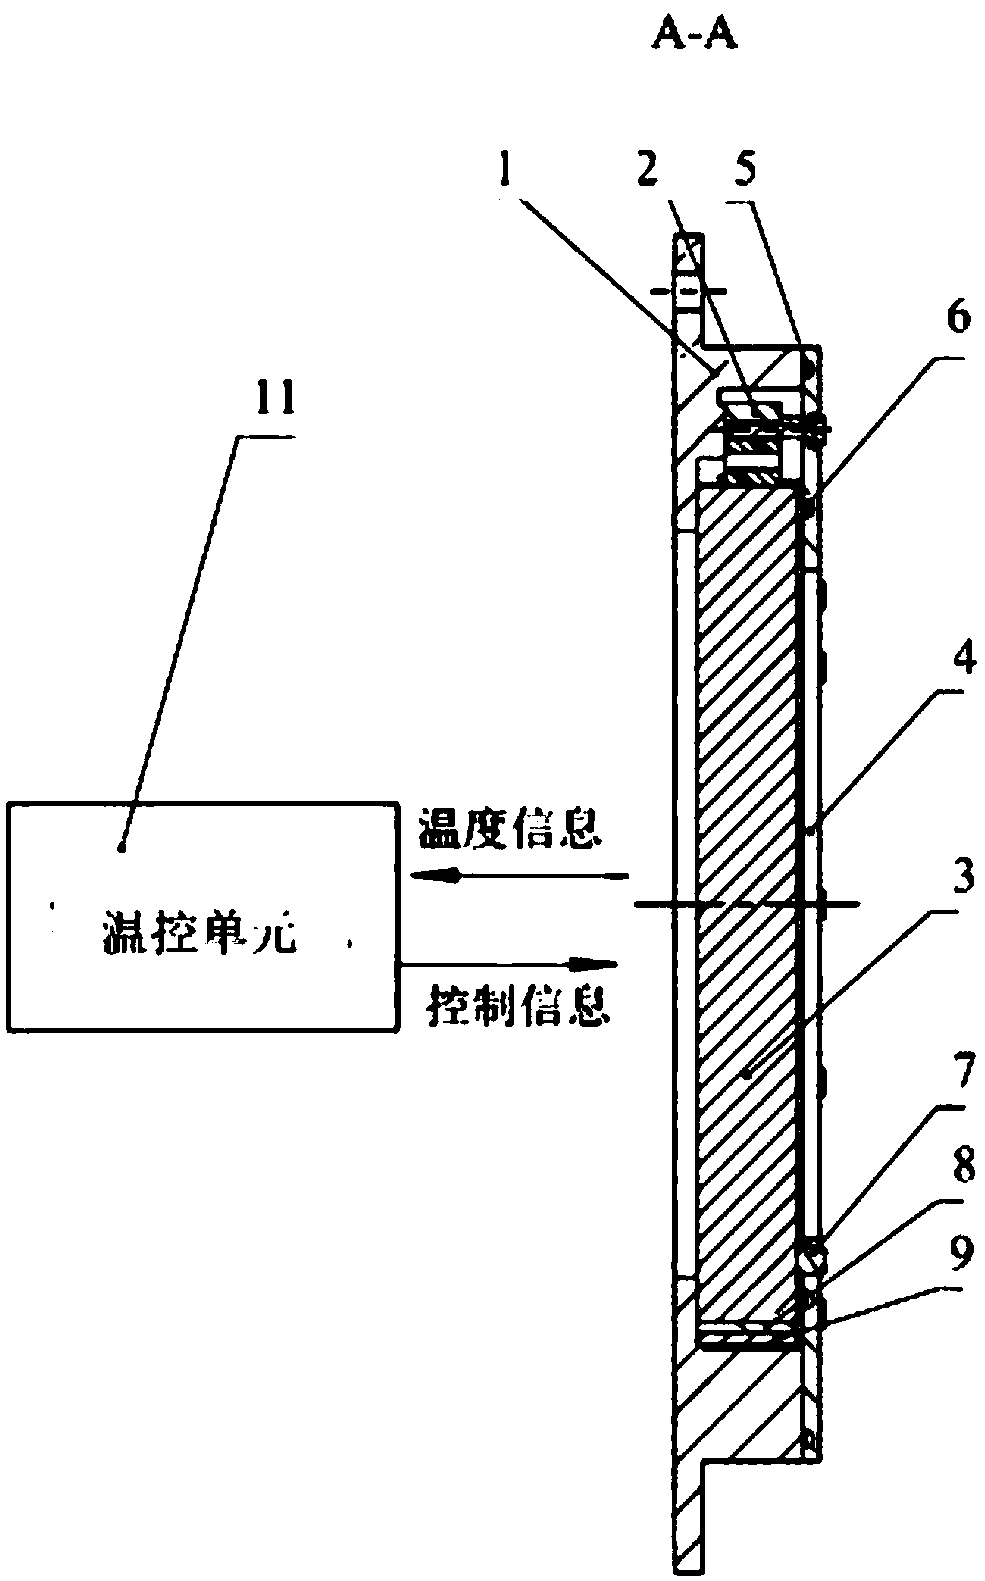 Optical window with temperature self-adaptive function